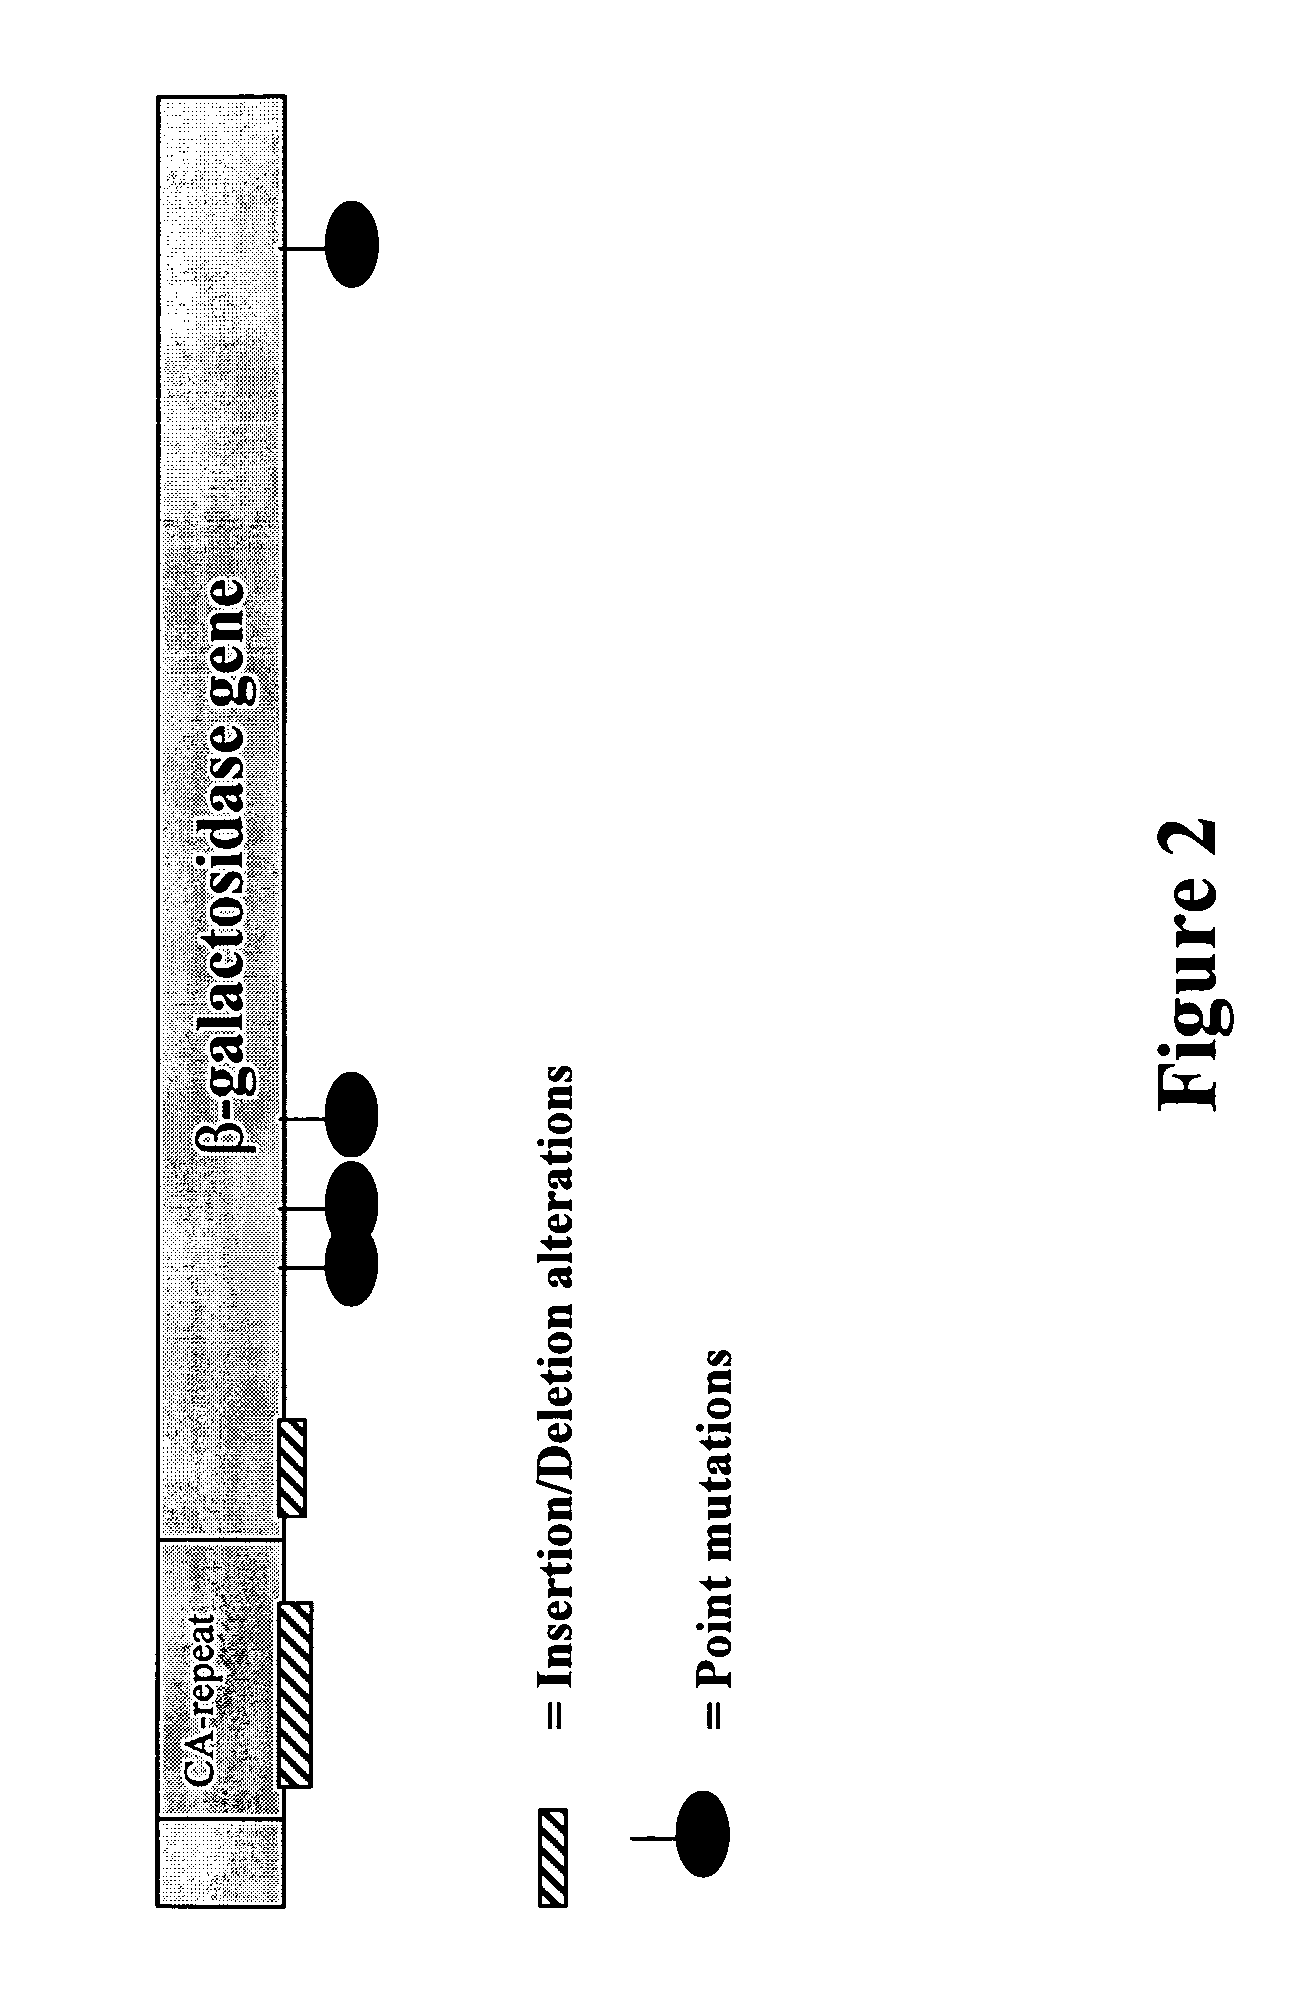 Methods for isolating novel antimicrobial agents from hypermutable mammalian cells